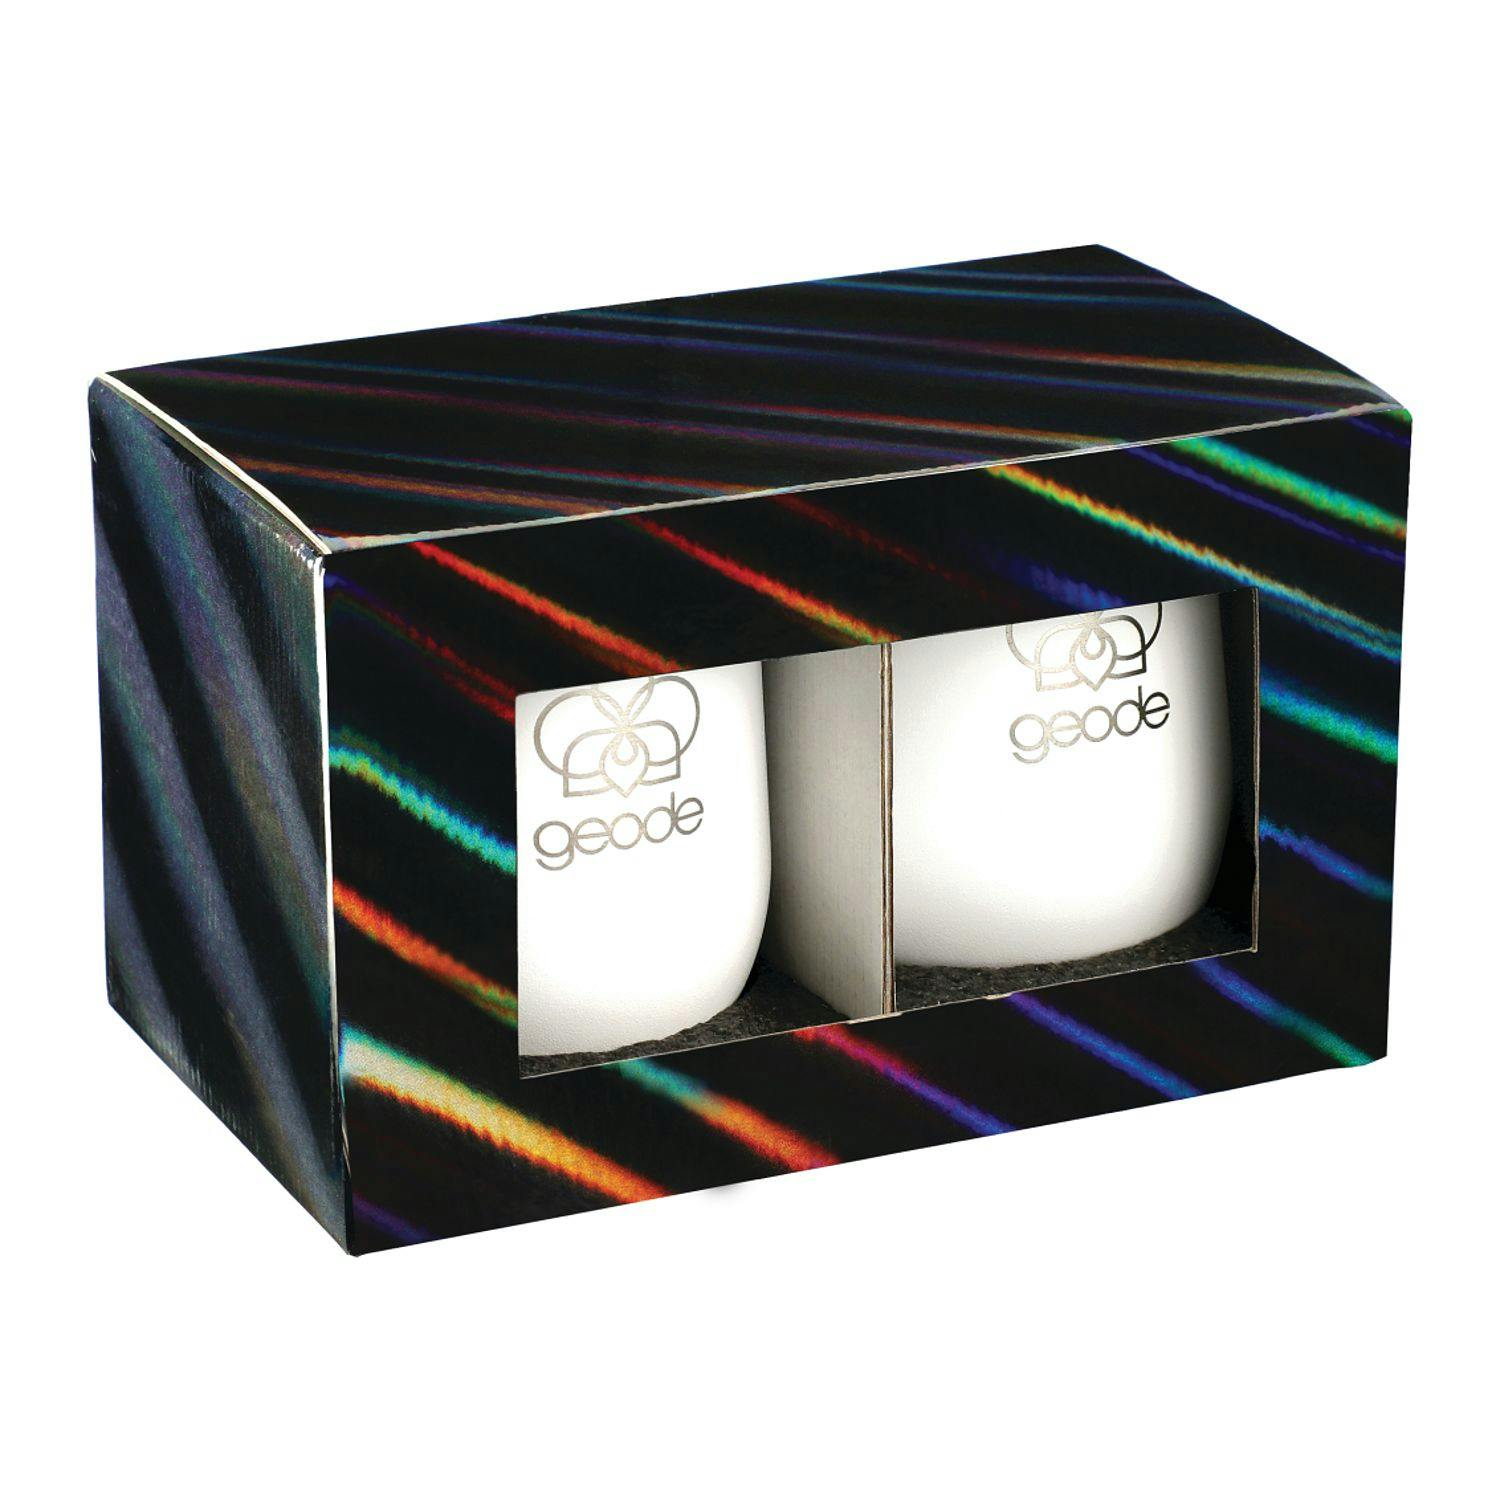 Corzo Cup 12oz 2 in 1 Gift Set - additional Image 1